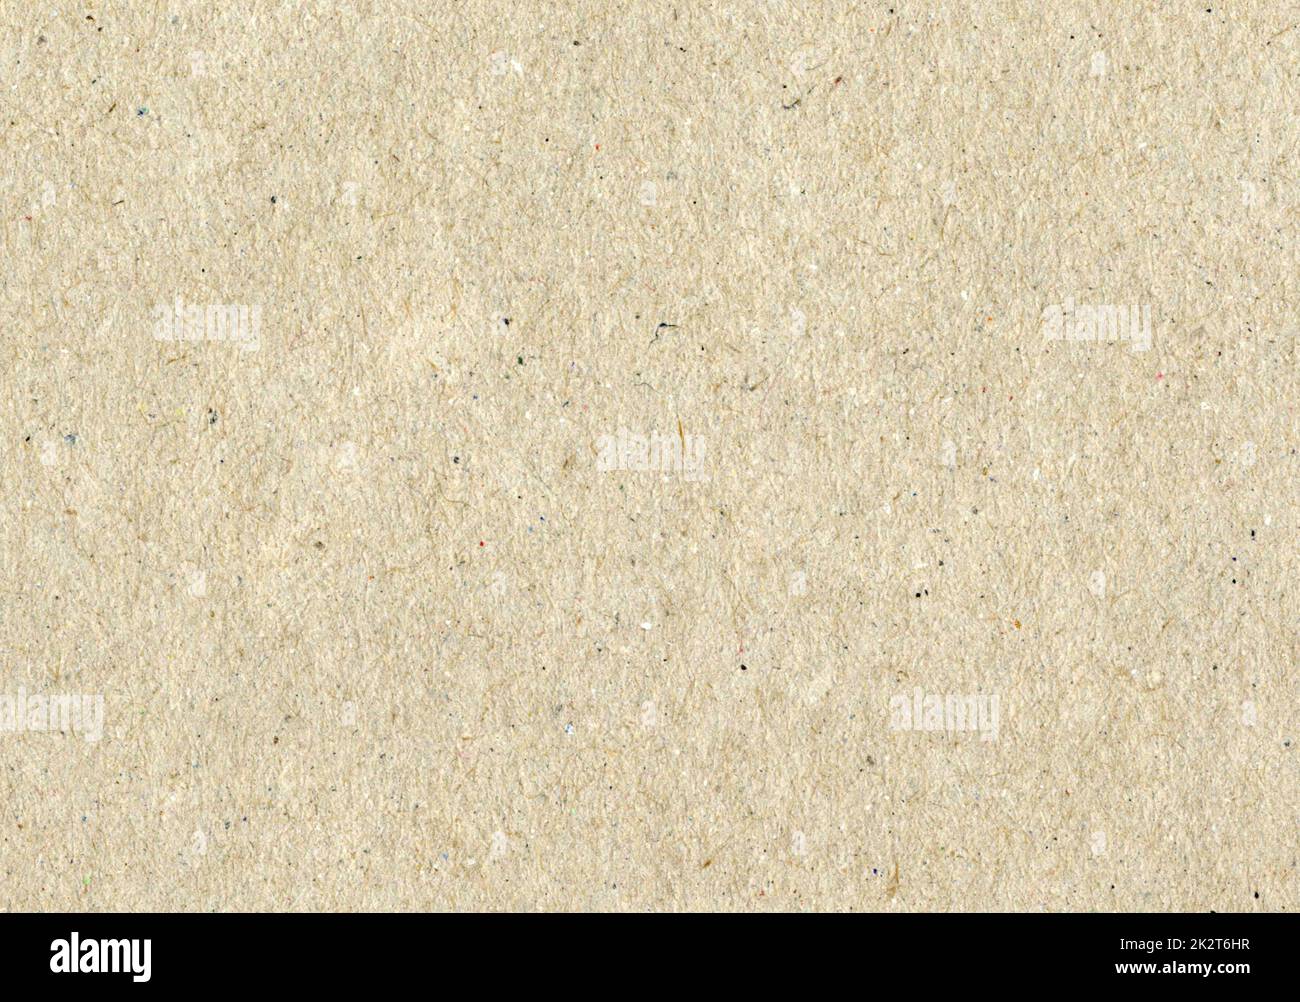 High detail close up high resolution paper texture background scan uncoated recycled fine fiber grain small colorful dust particles creme light brown beige color for wallpaper presentation copy space Stock Photo